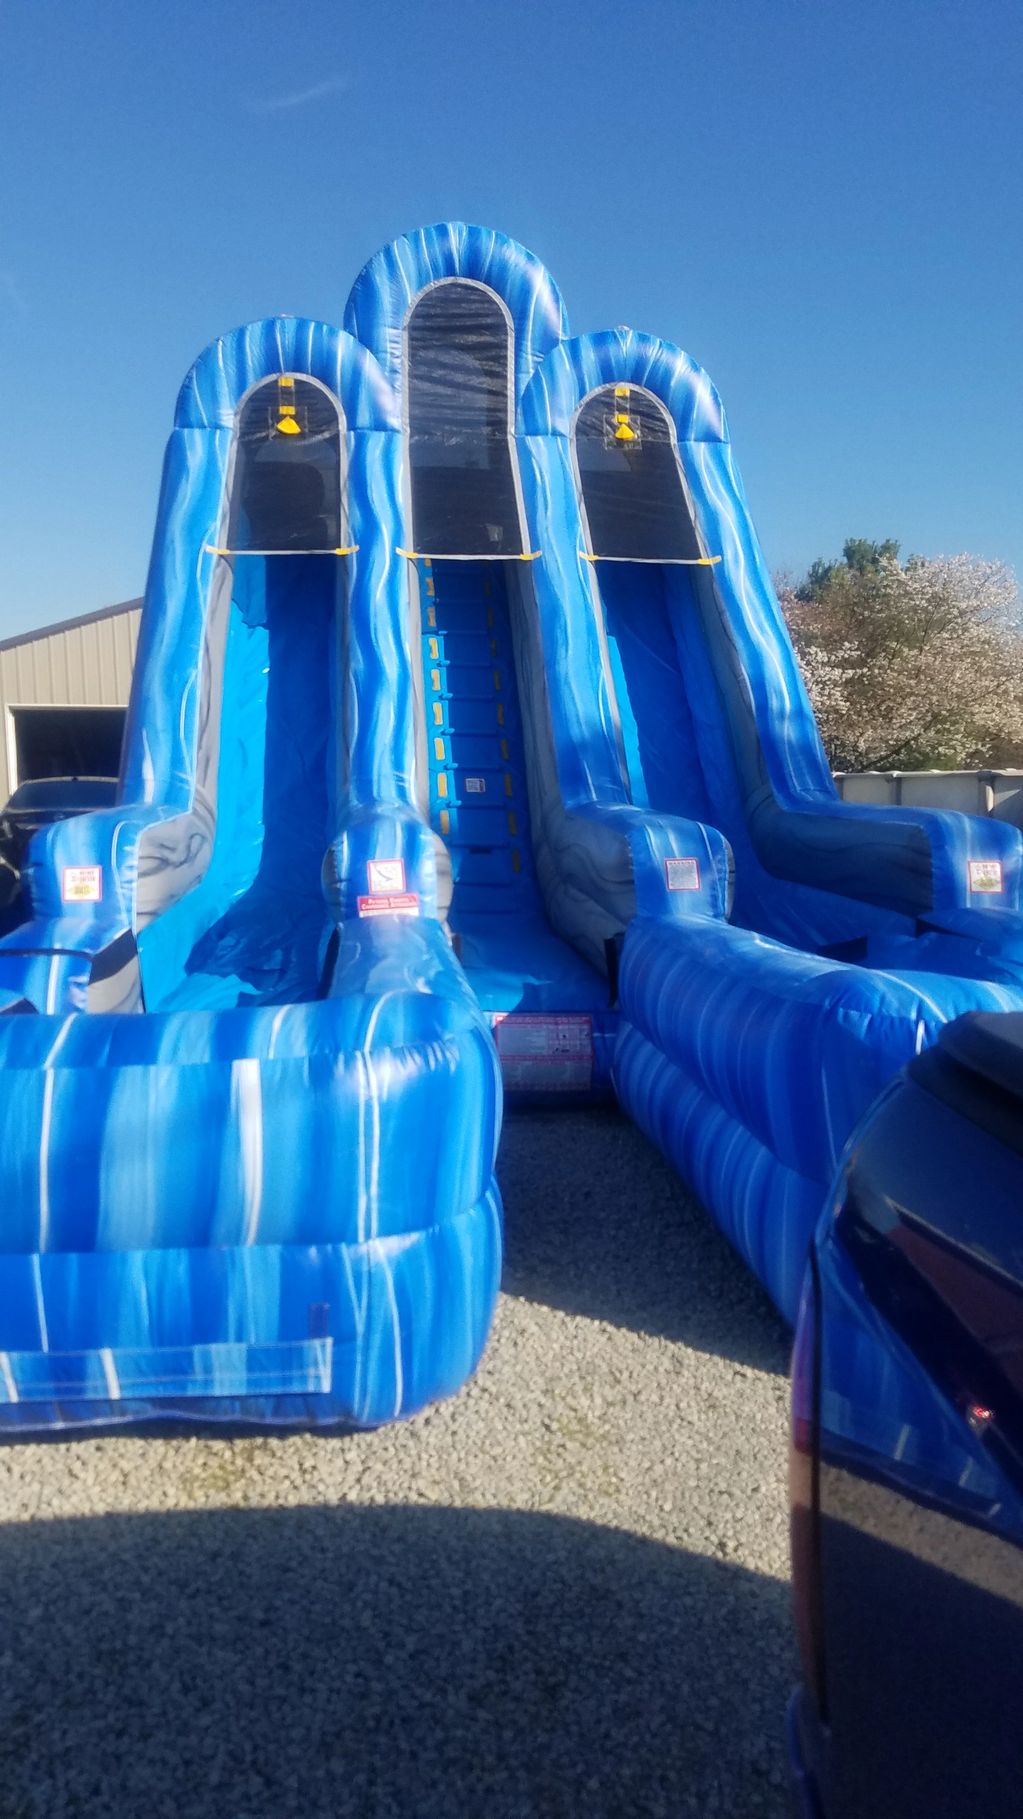 DOUBLE BLUE MARBLE
20FT Tall 40ft long 20ft wide
Dual lane slide with pools
450.00